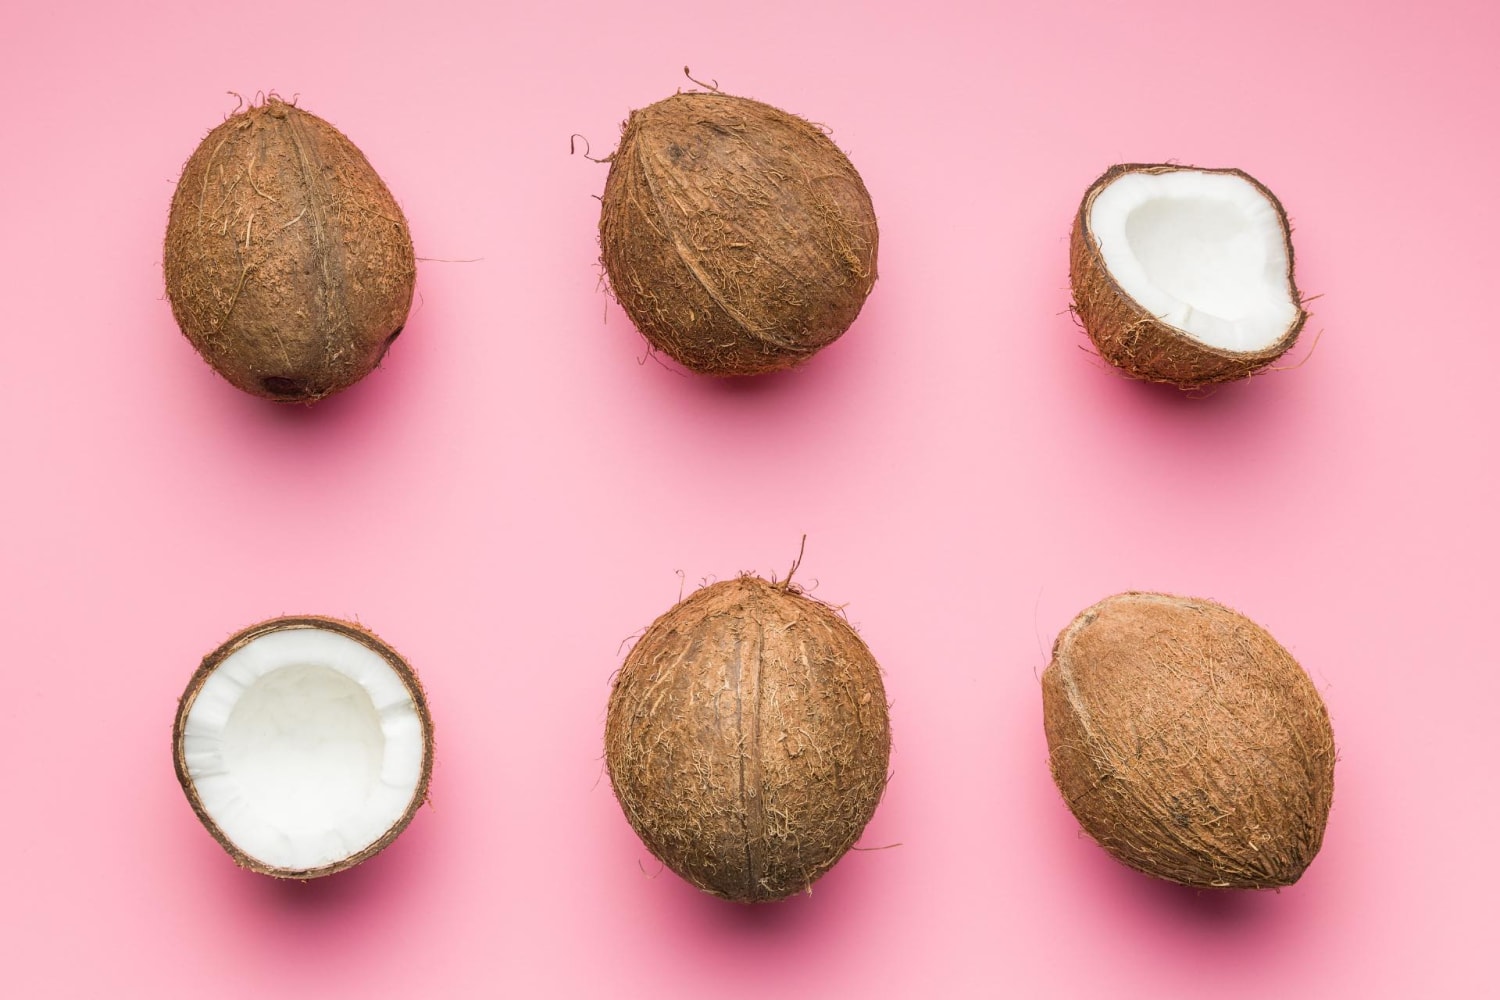 60+ Ways To Use Coconut Oil and Why You Should - The Well Balanced Millennial